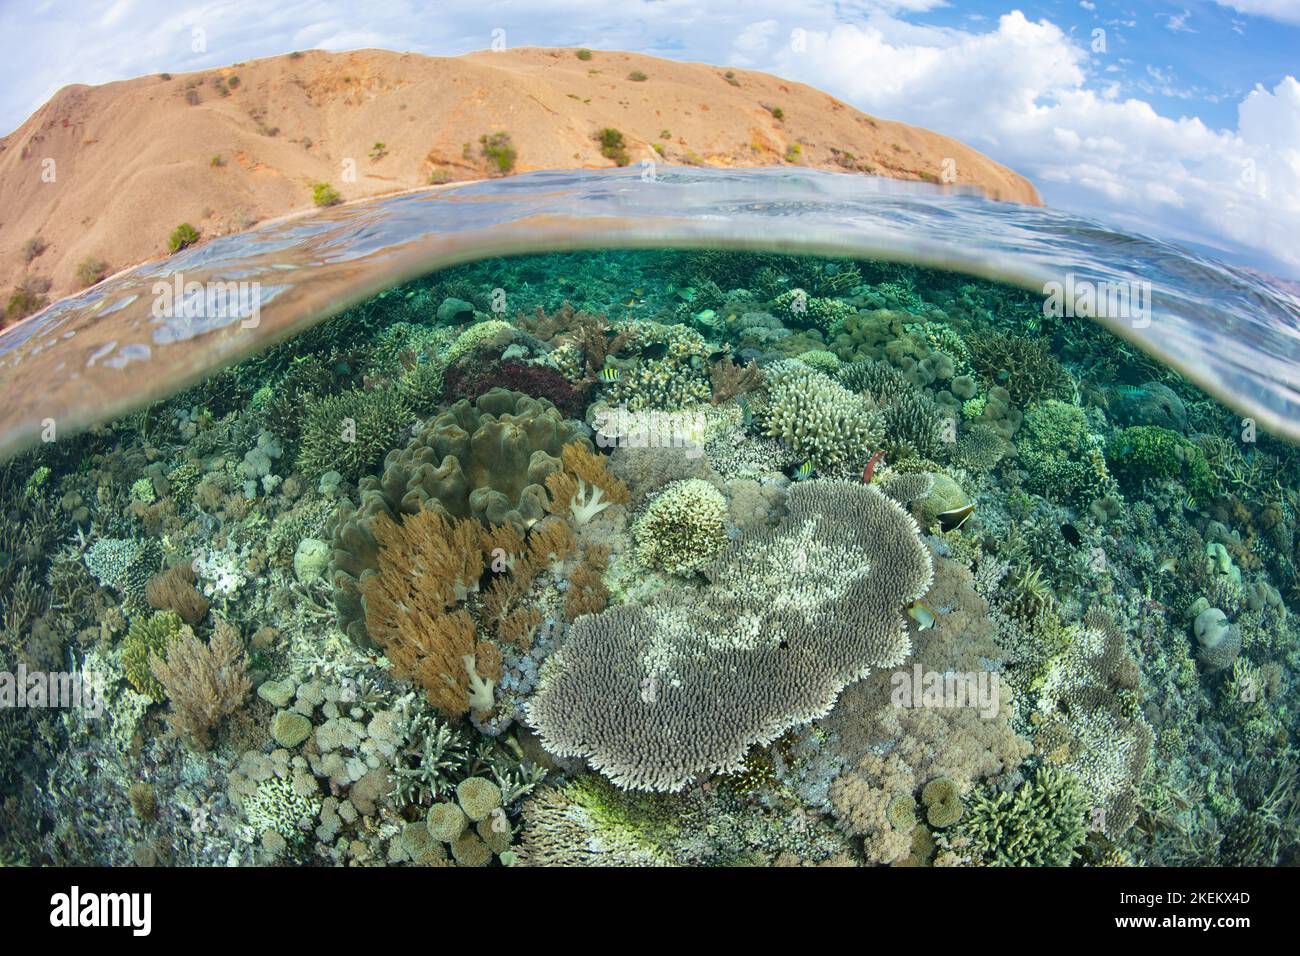 An array of corals thrive on a shallow, healthy reef near Komodo, Indonesia. This area, within the Coral Triangle, has high marine biodiversity. Stock Photo